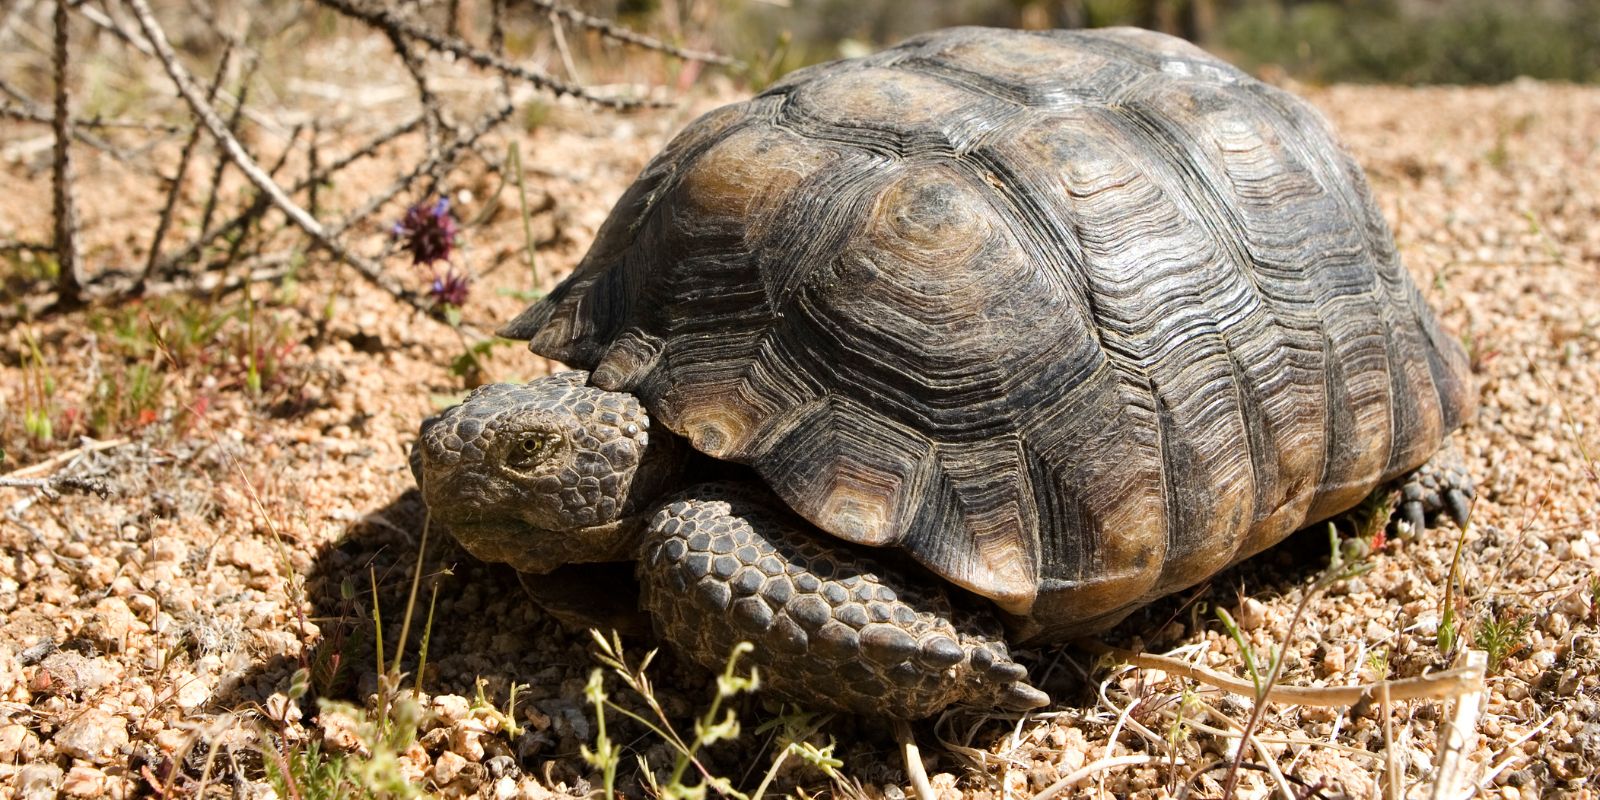 A picture of a desert tortoise with landscape behind it